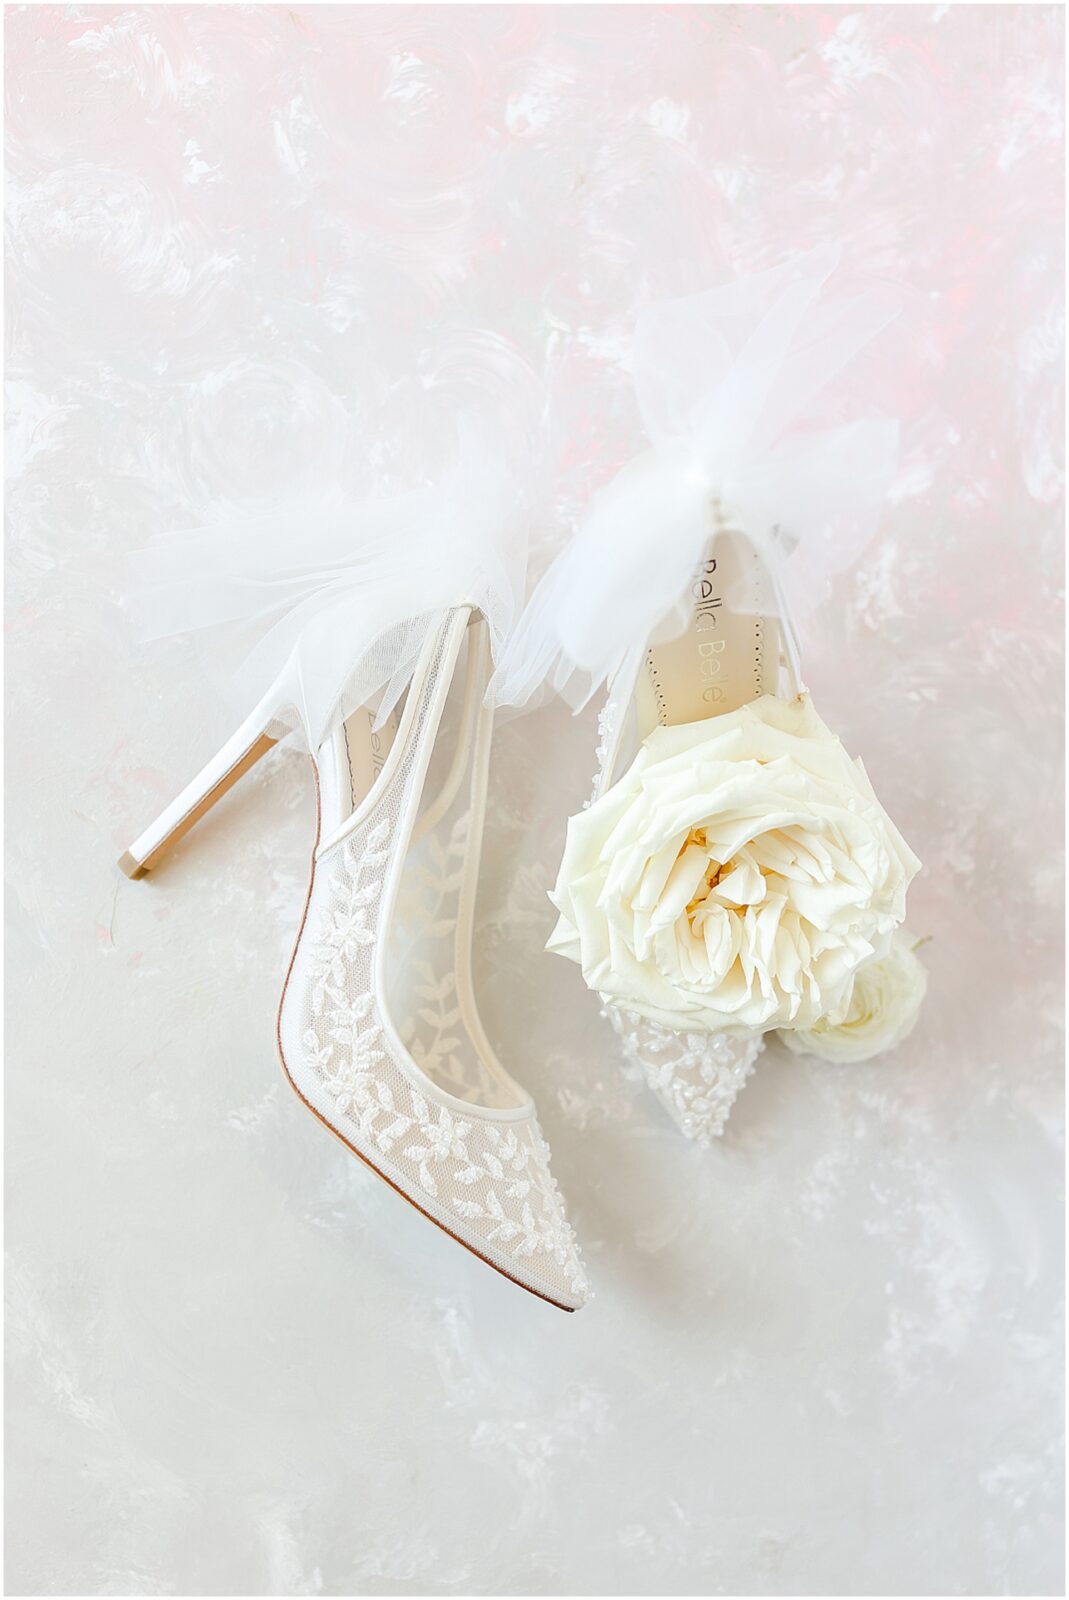 bella belle shoes

Elegant Summer Wedding at the Hawthorne House | Kansas City Wedding Venues | Wedding Photography and Videography Film by Mariam Saifan Photography | Photography Education | How to grow a photography business | White and Blue Wedding Flowers | St. Louis Wedding and Kansas City Overland Park Wedding and Engagement Portrait Photographer 